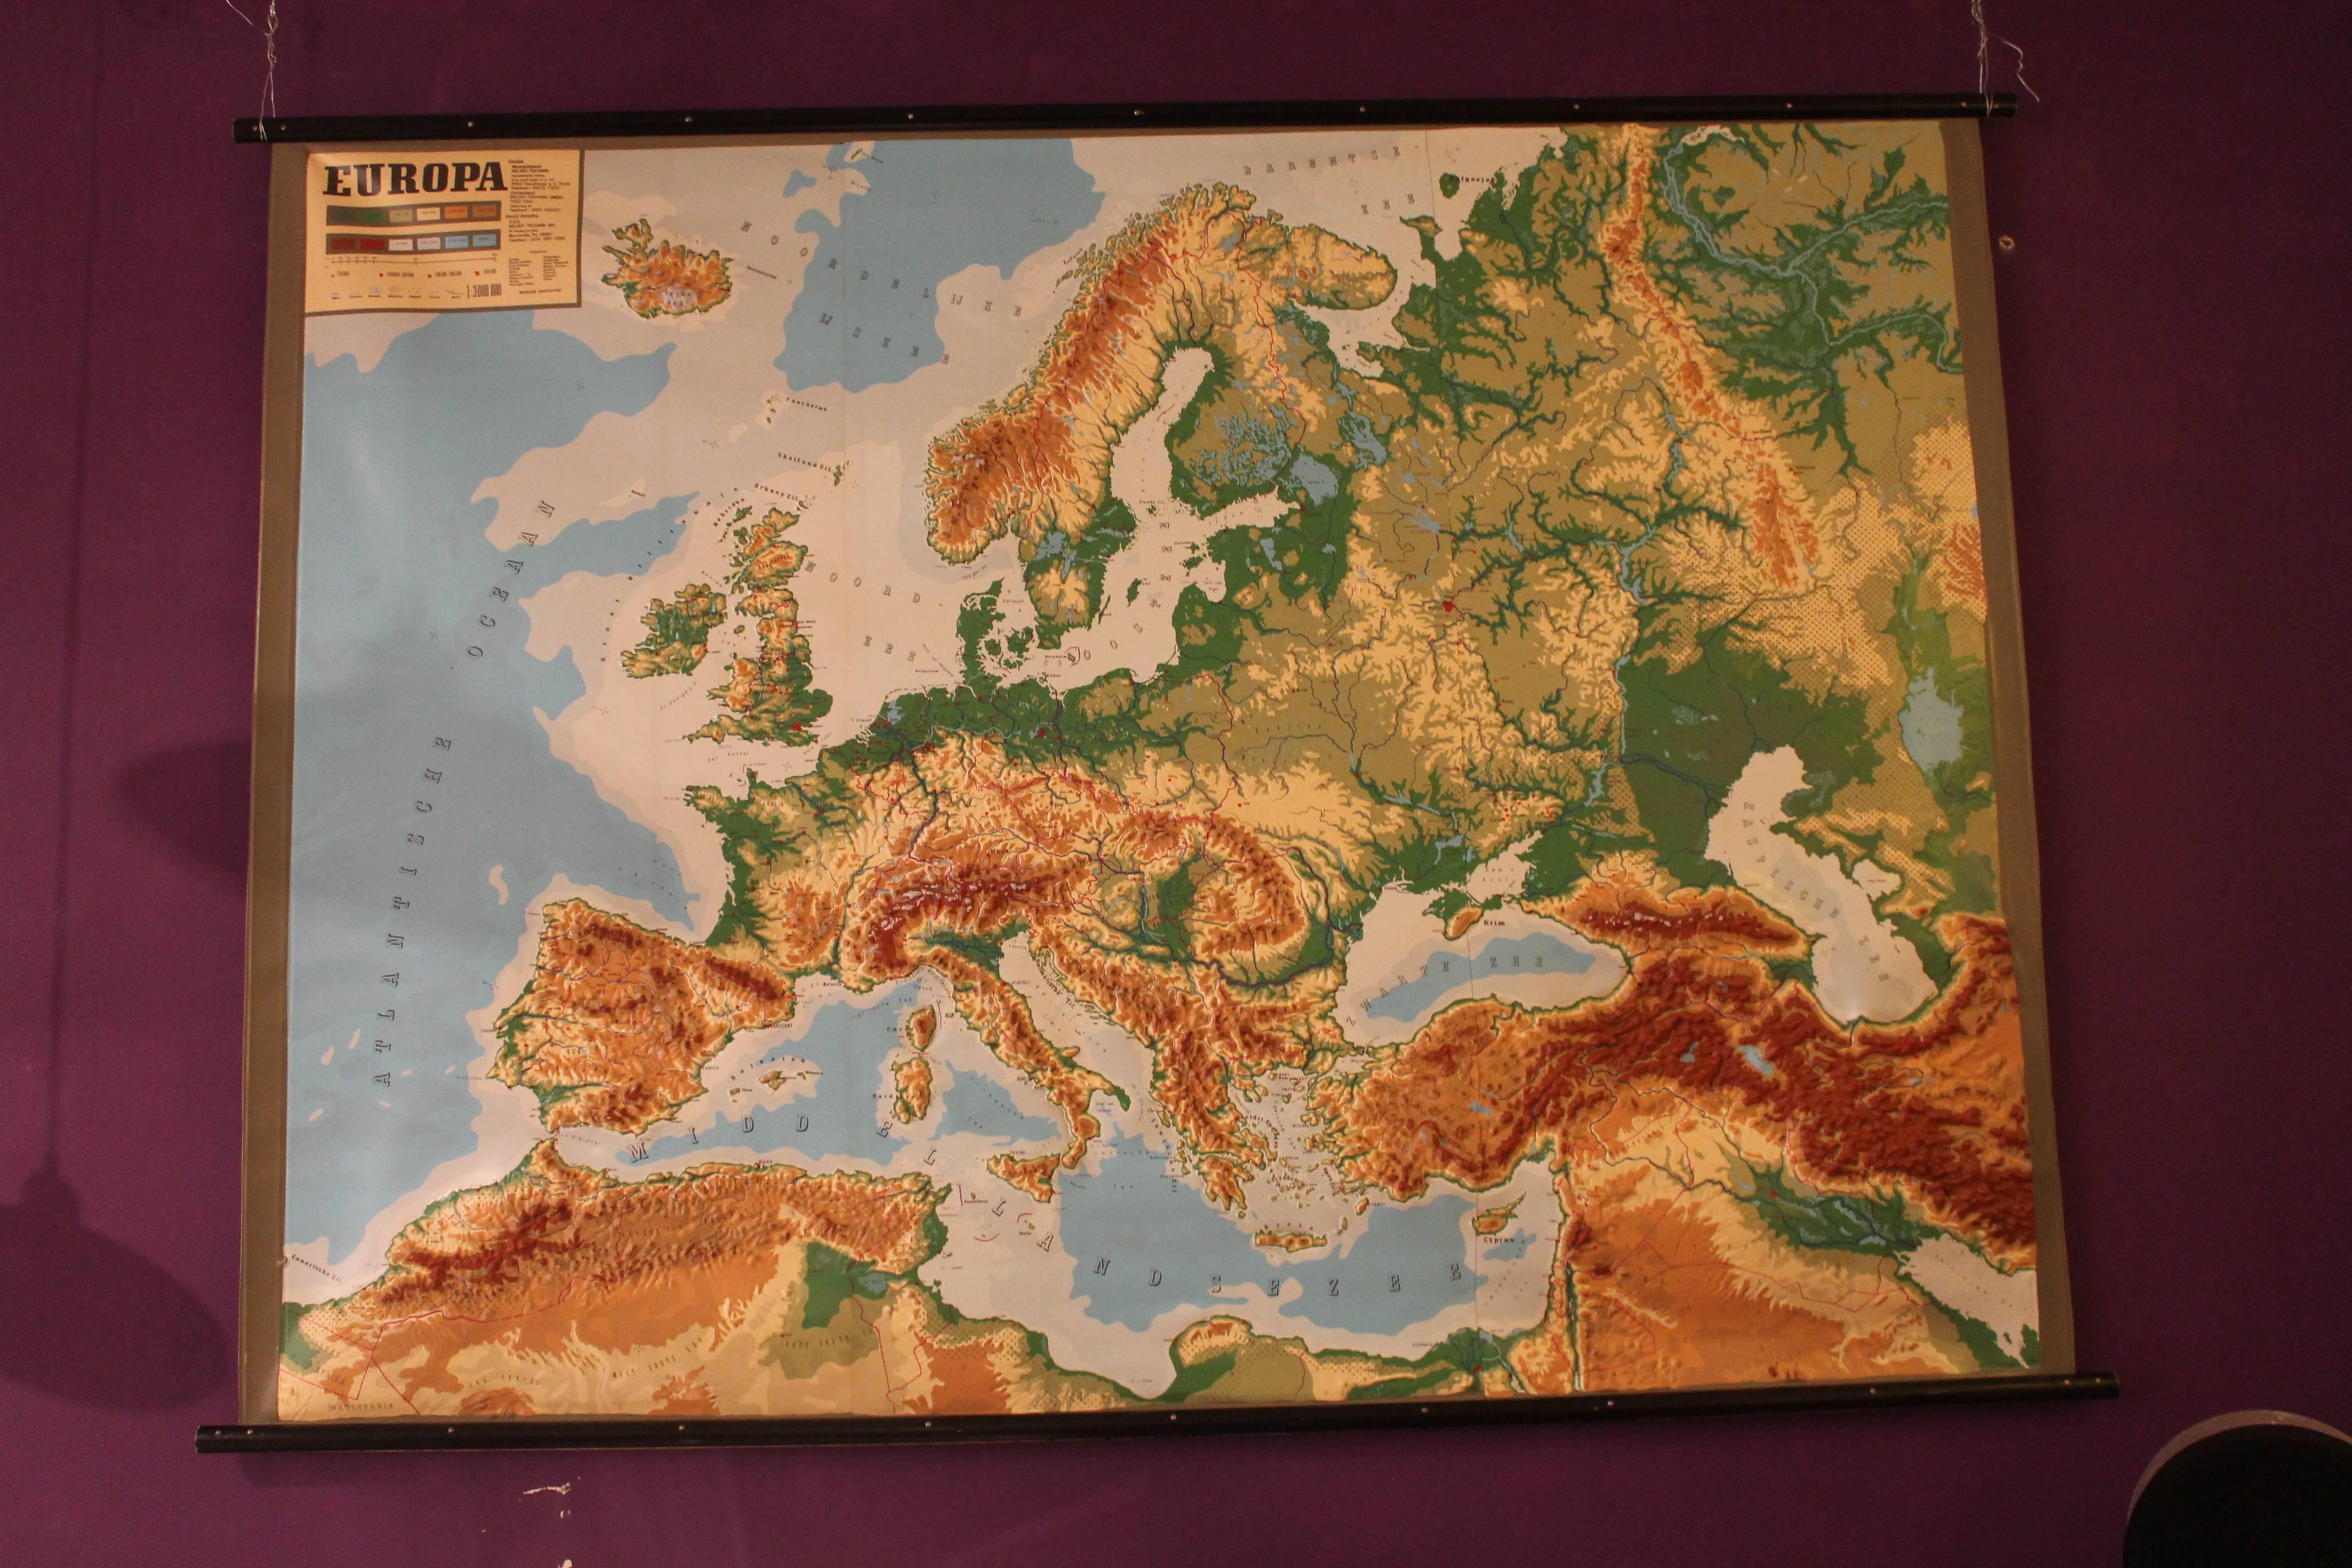 European Large Decorative Relief Map of Europe, 1970s